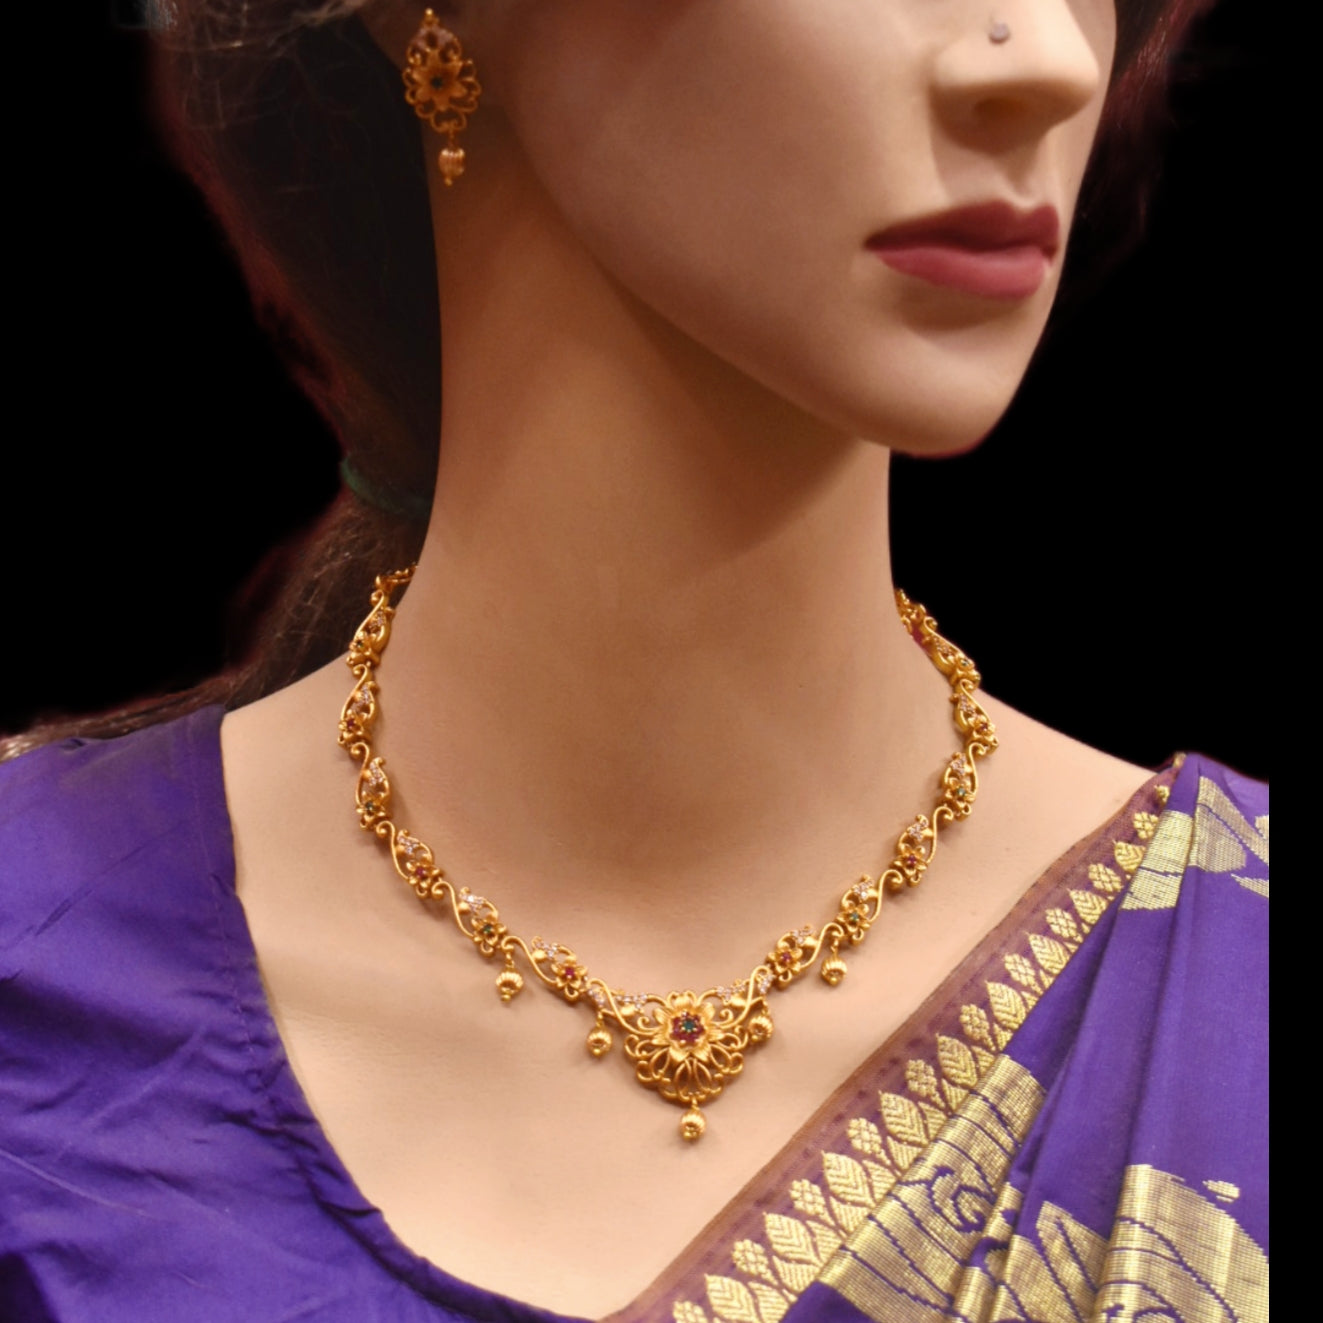 "Glowing Elegance: The Timeless Charm of Asp Fashion Jewellery's Short Antique CZ Necklace Set"